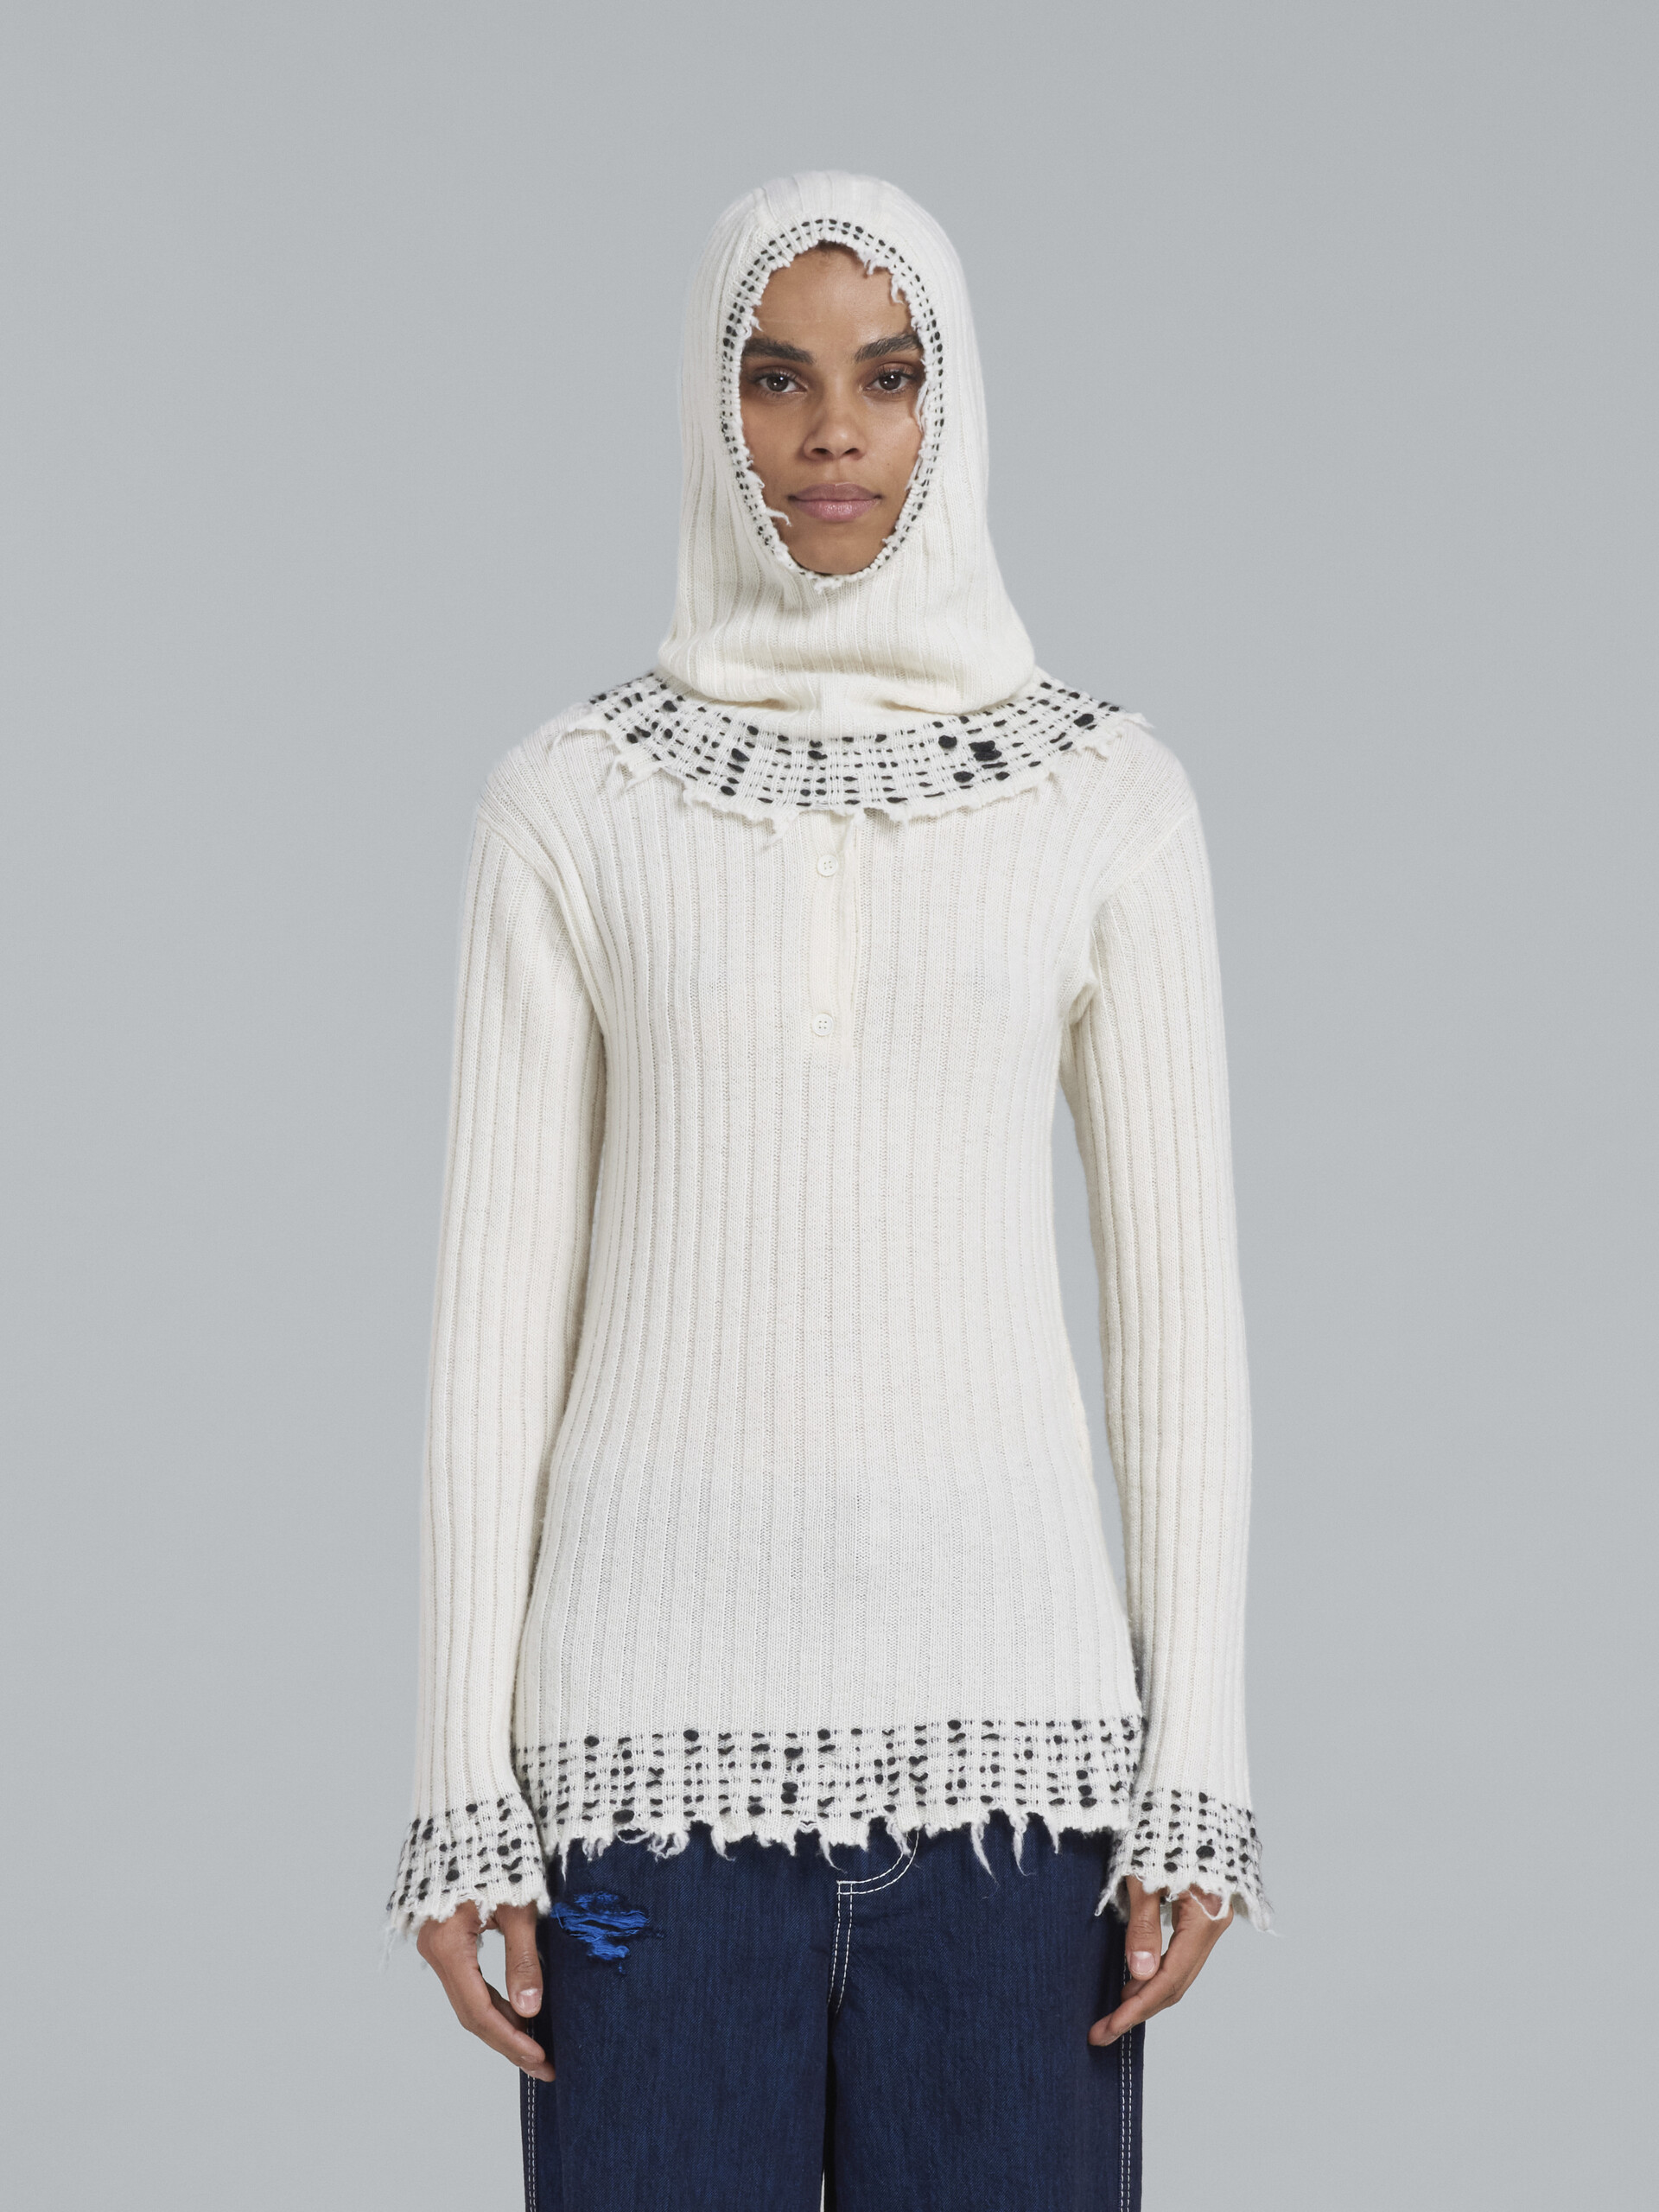 White knitted wool sweater - Pullovers - Image 2